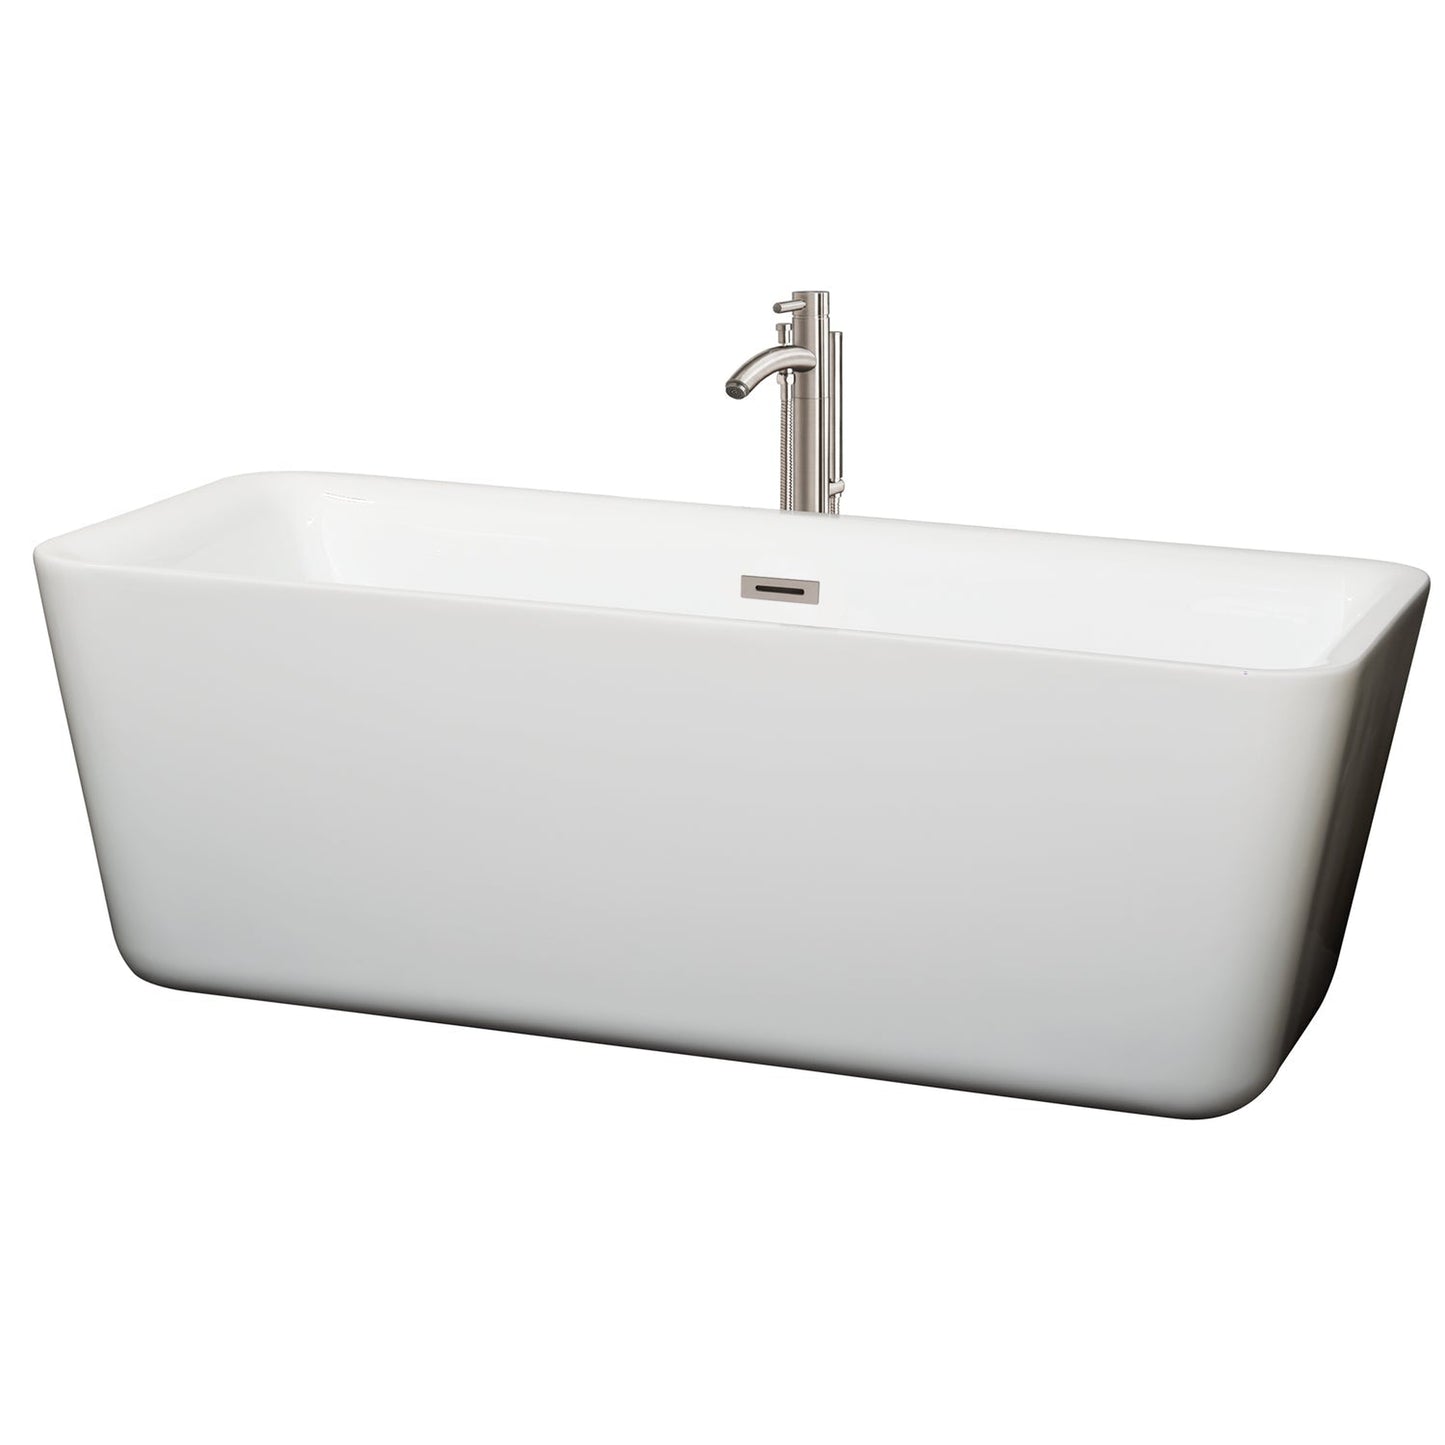 Wyndham Collection Emily 69" Freestanding Bathtub in White With Floor Mounted Faucet, Drain and Overflow Trim in Brushed Nickel